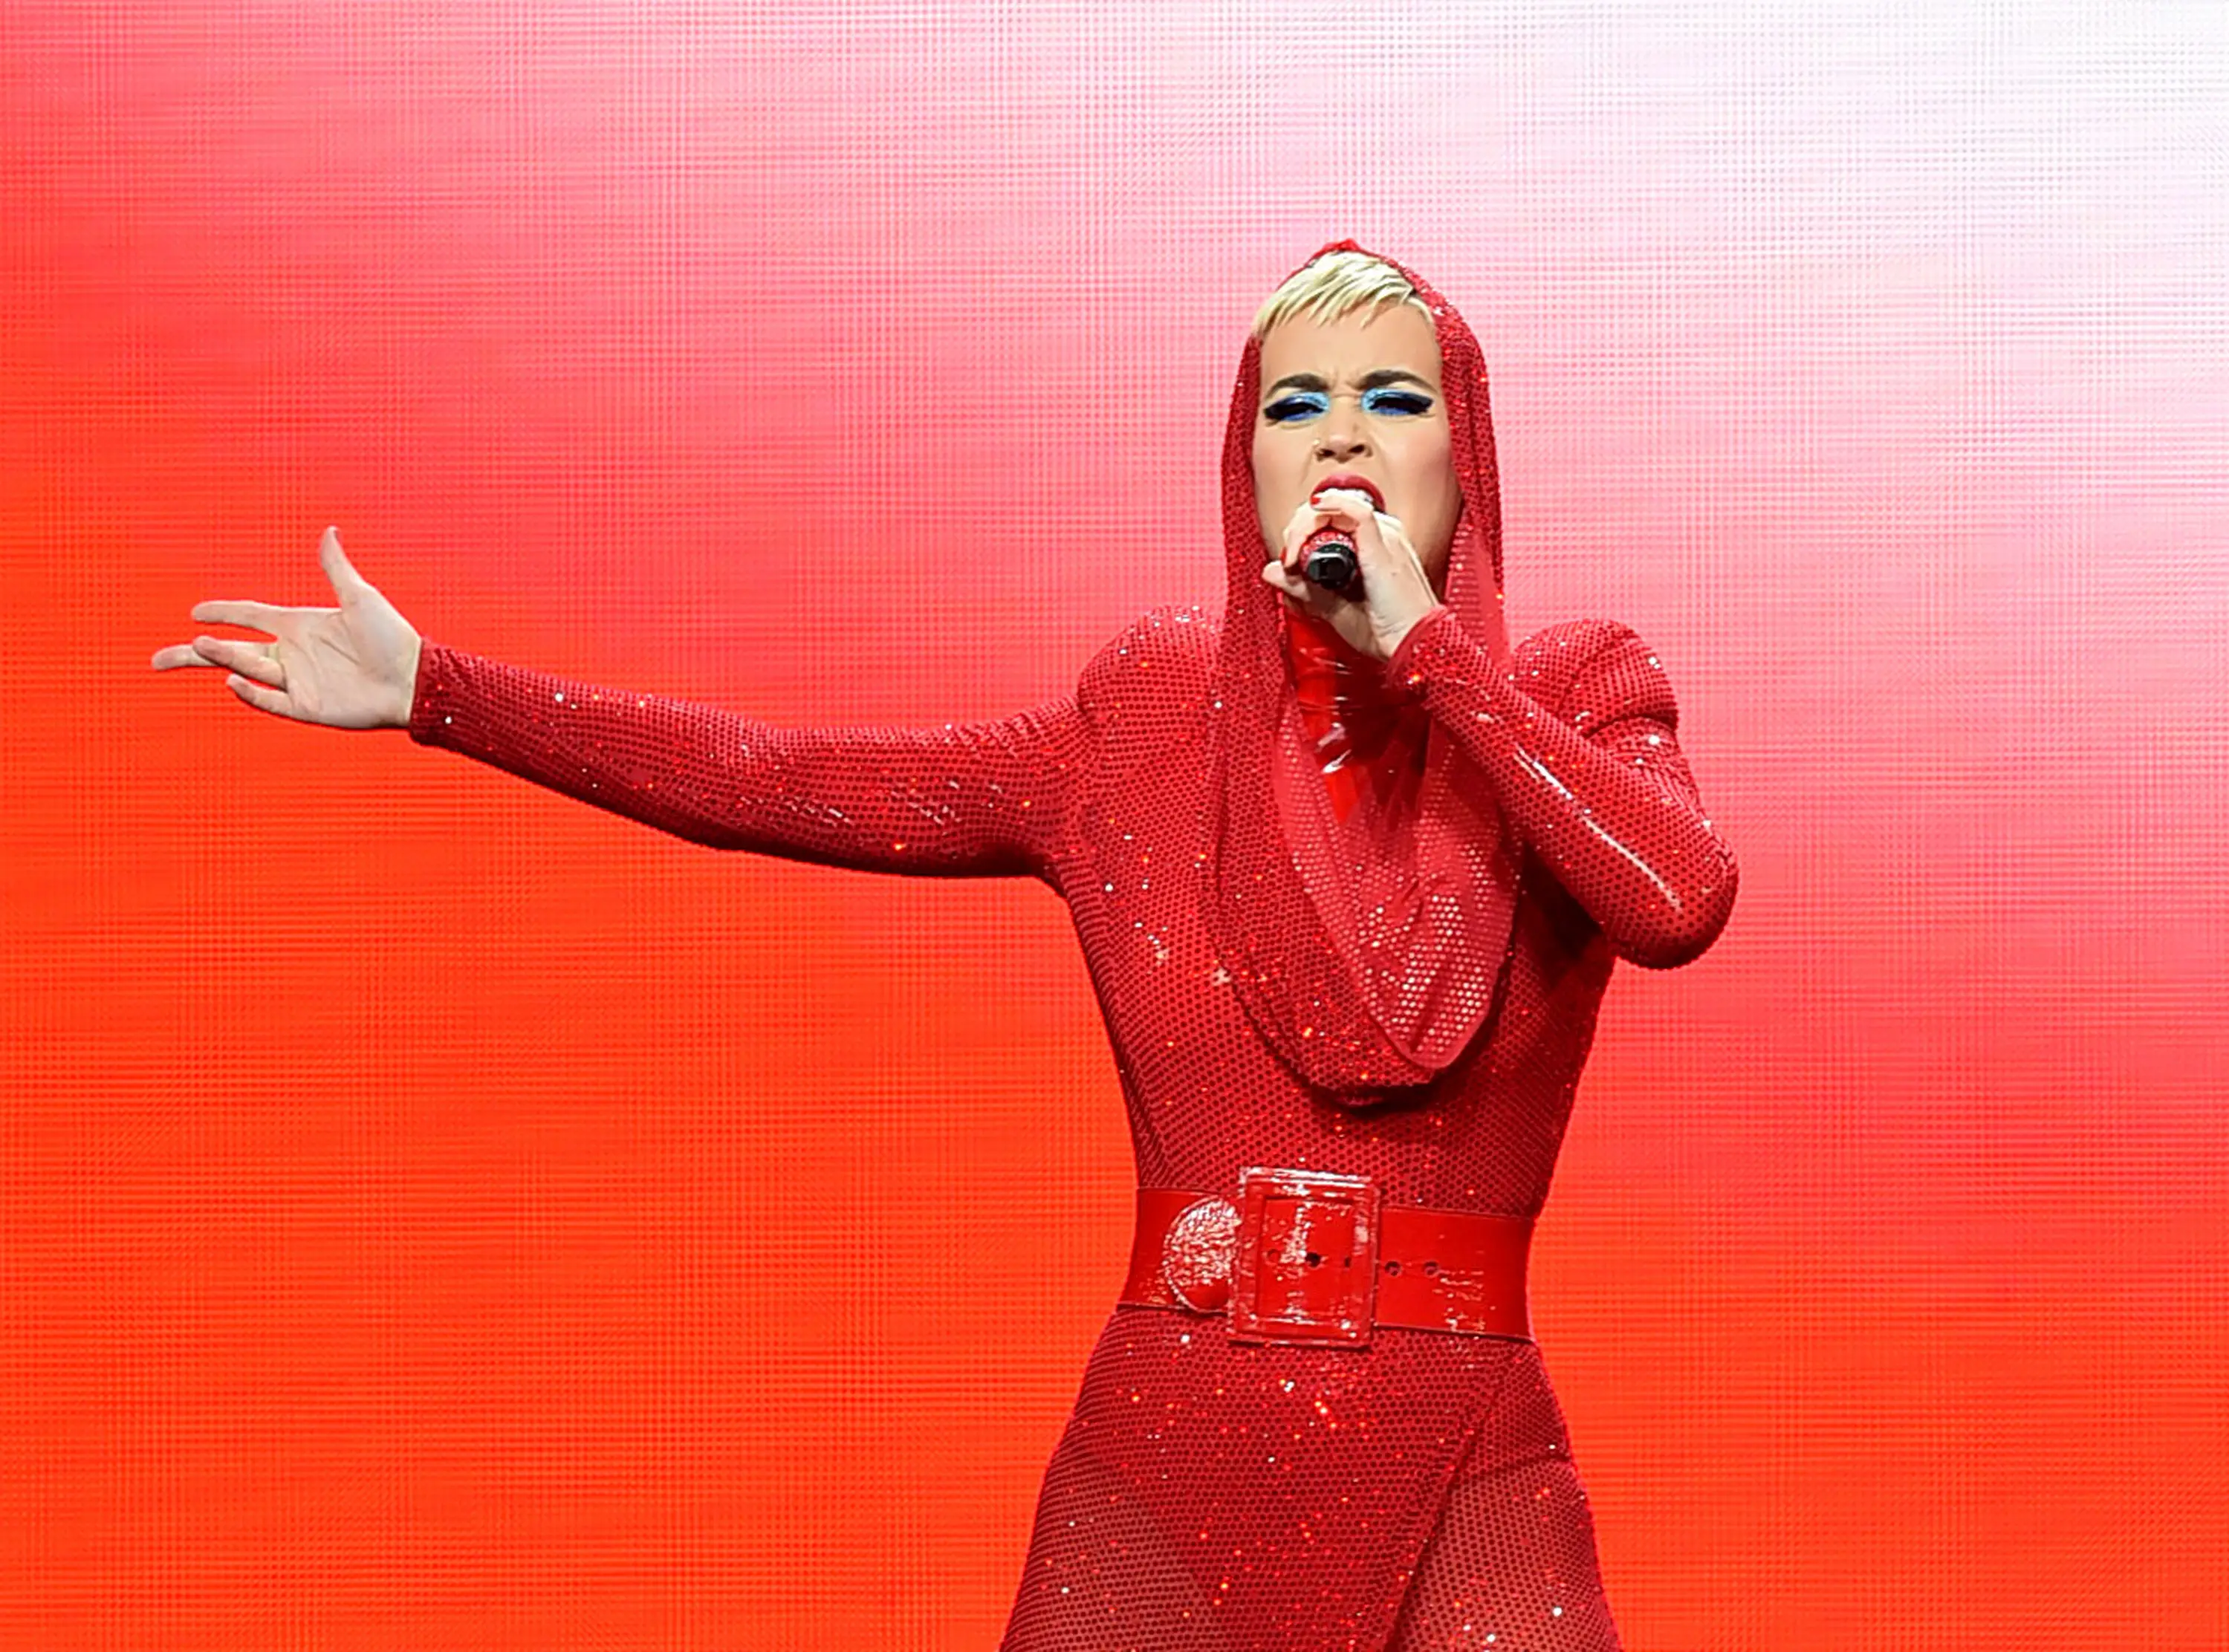 Katy Perry (AFP / KEVIN WINTER / GETTY IMAGES NORTH AMERICA)